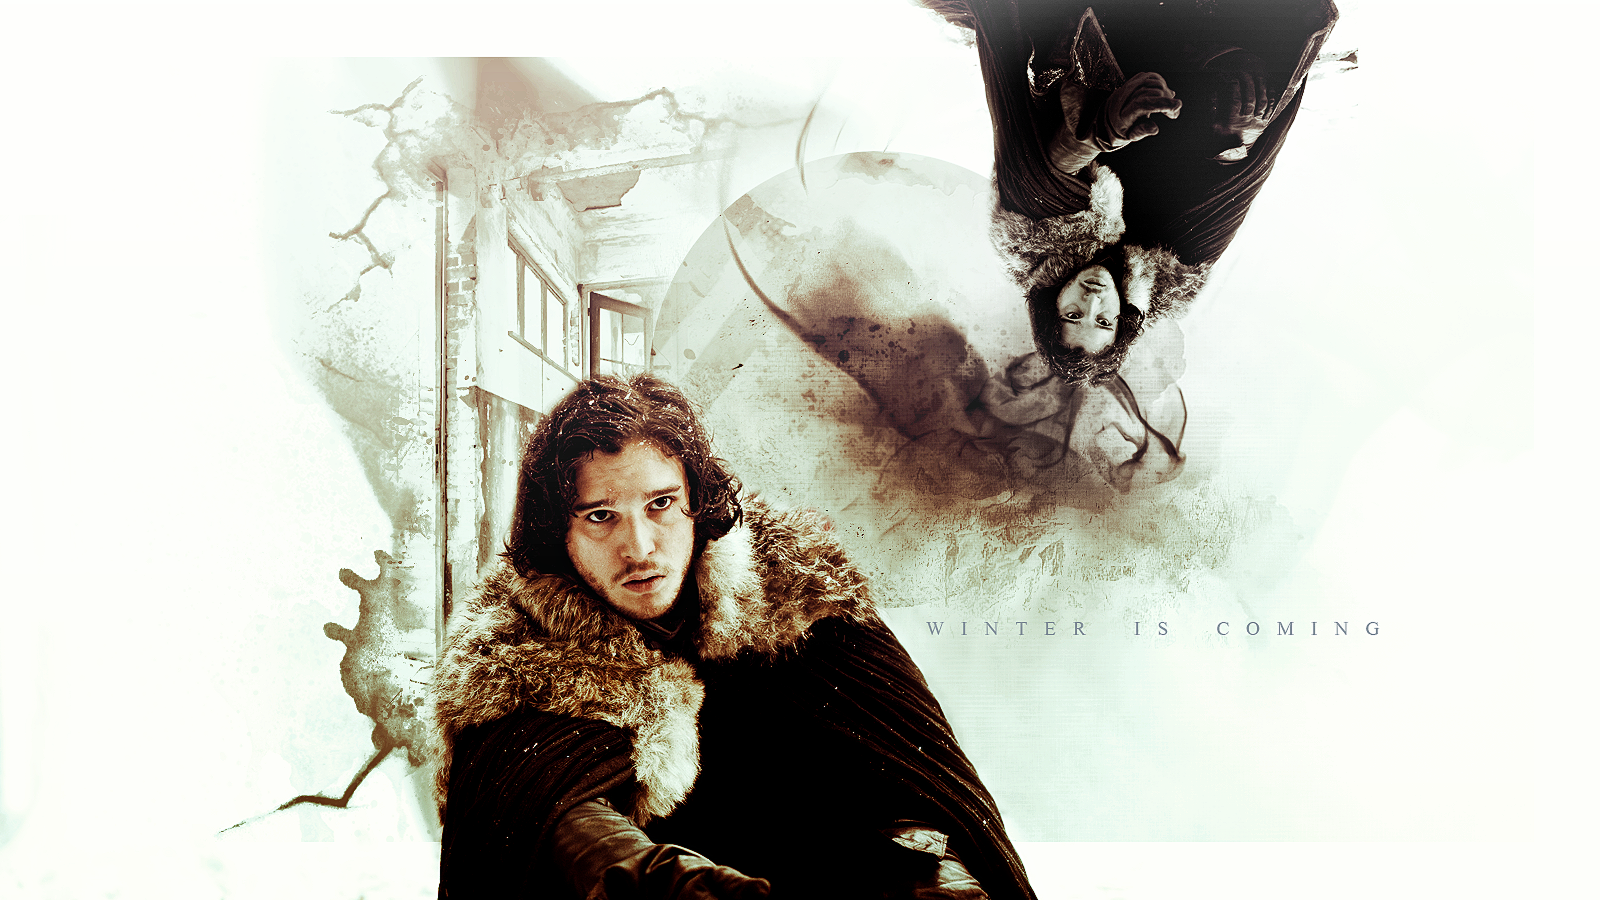 Game Of Thrones Image Jon Snow HD Wallpaper And Background Photos